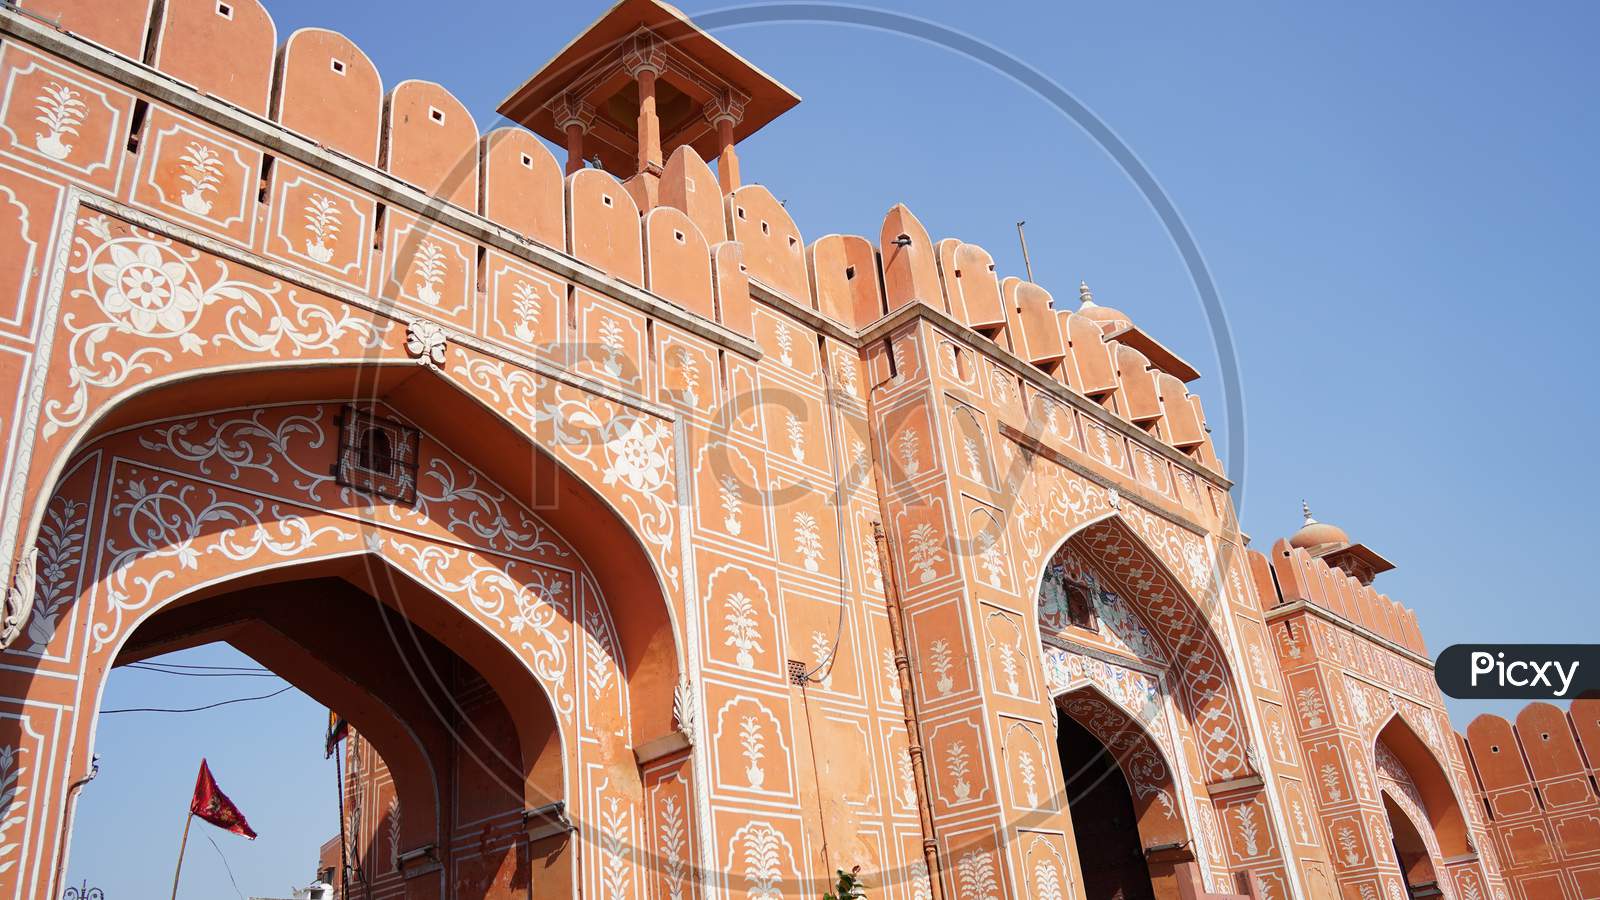 Chandpole Gate In Pink City Jaipur. Historic Ancient Gate With Pink Color In 18 Th Centuary.